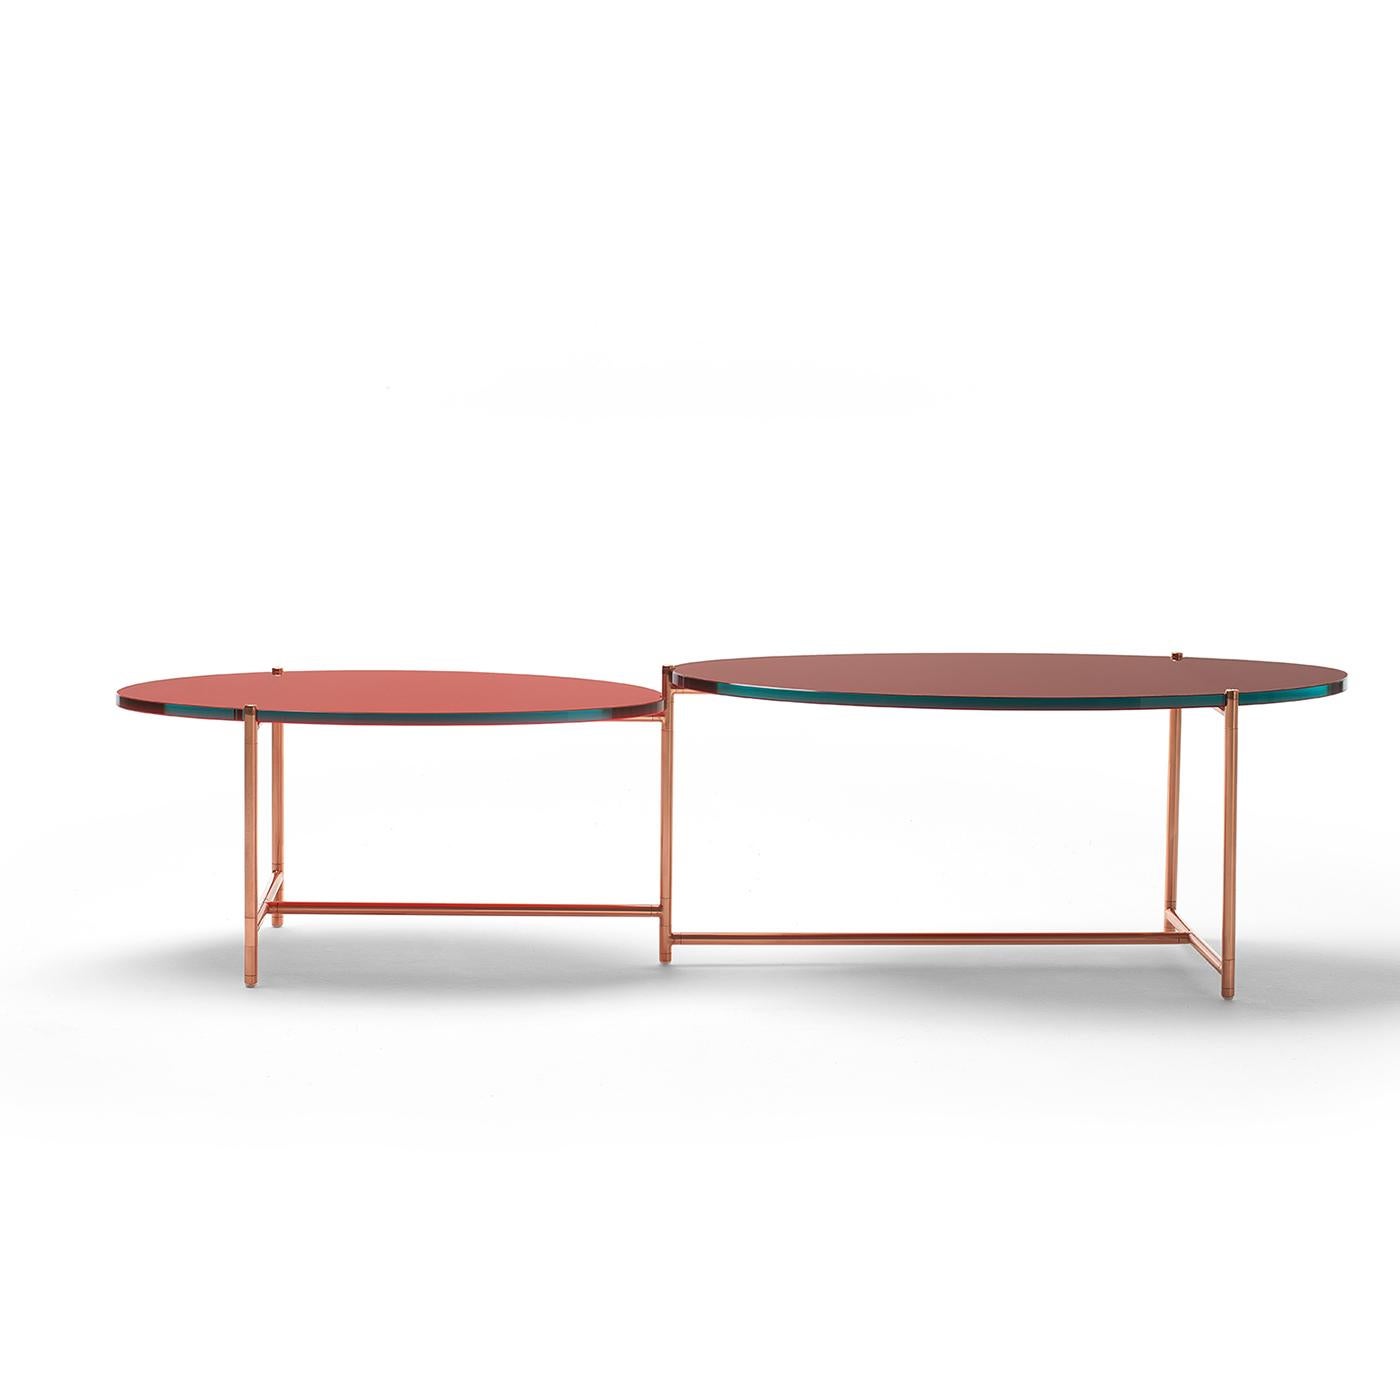 A subtle harmony and balance joins together the components of this cutting-edge coffee table, whose distinctive feature is the asymmetrical tabletops moving around a central pivot fitting. Raised on a slender, cylindrical steel frame covered with